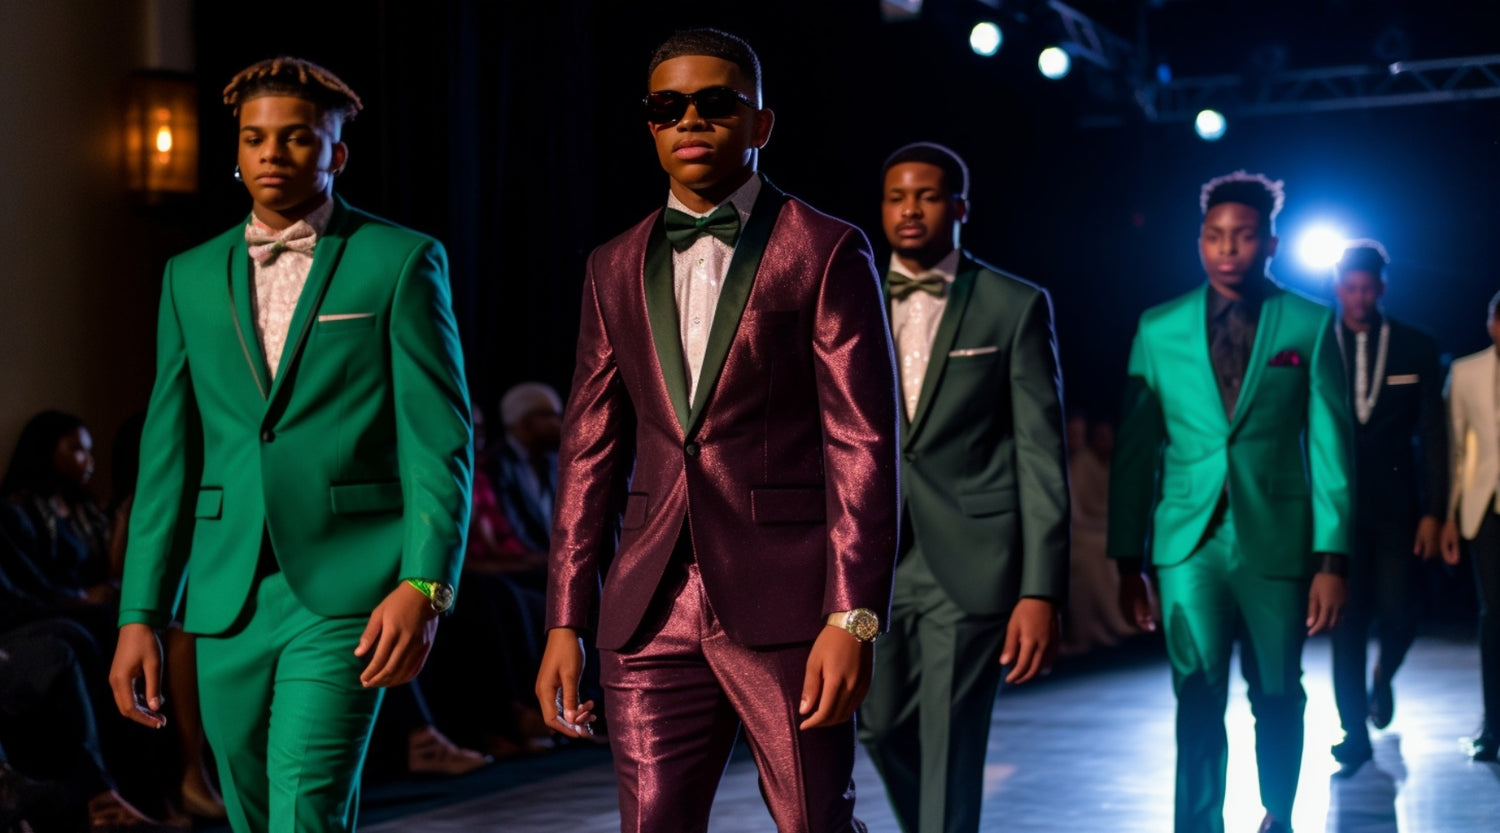 Young men confidently walking the runway in KCT Menswear's 2024 prom collection, featuring elegant green and burgundy suits and tuxedos, highlighting the latest prom trends and styles.